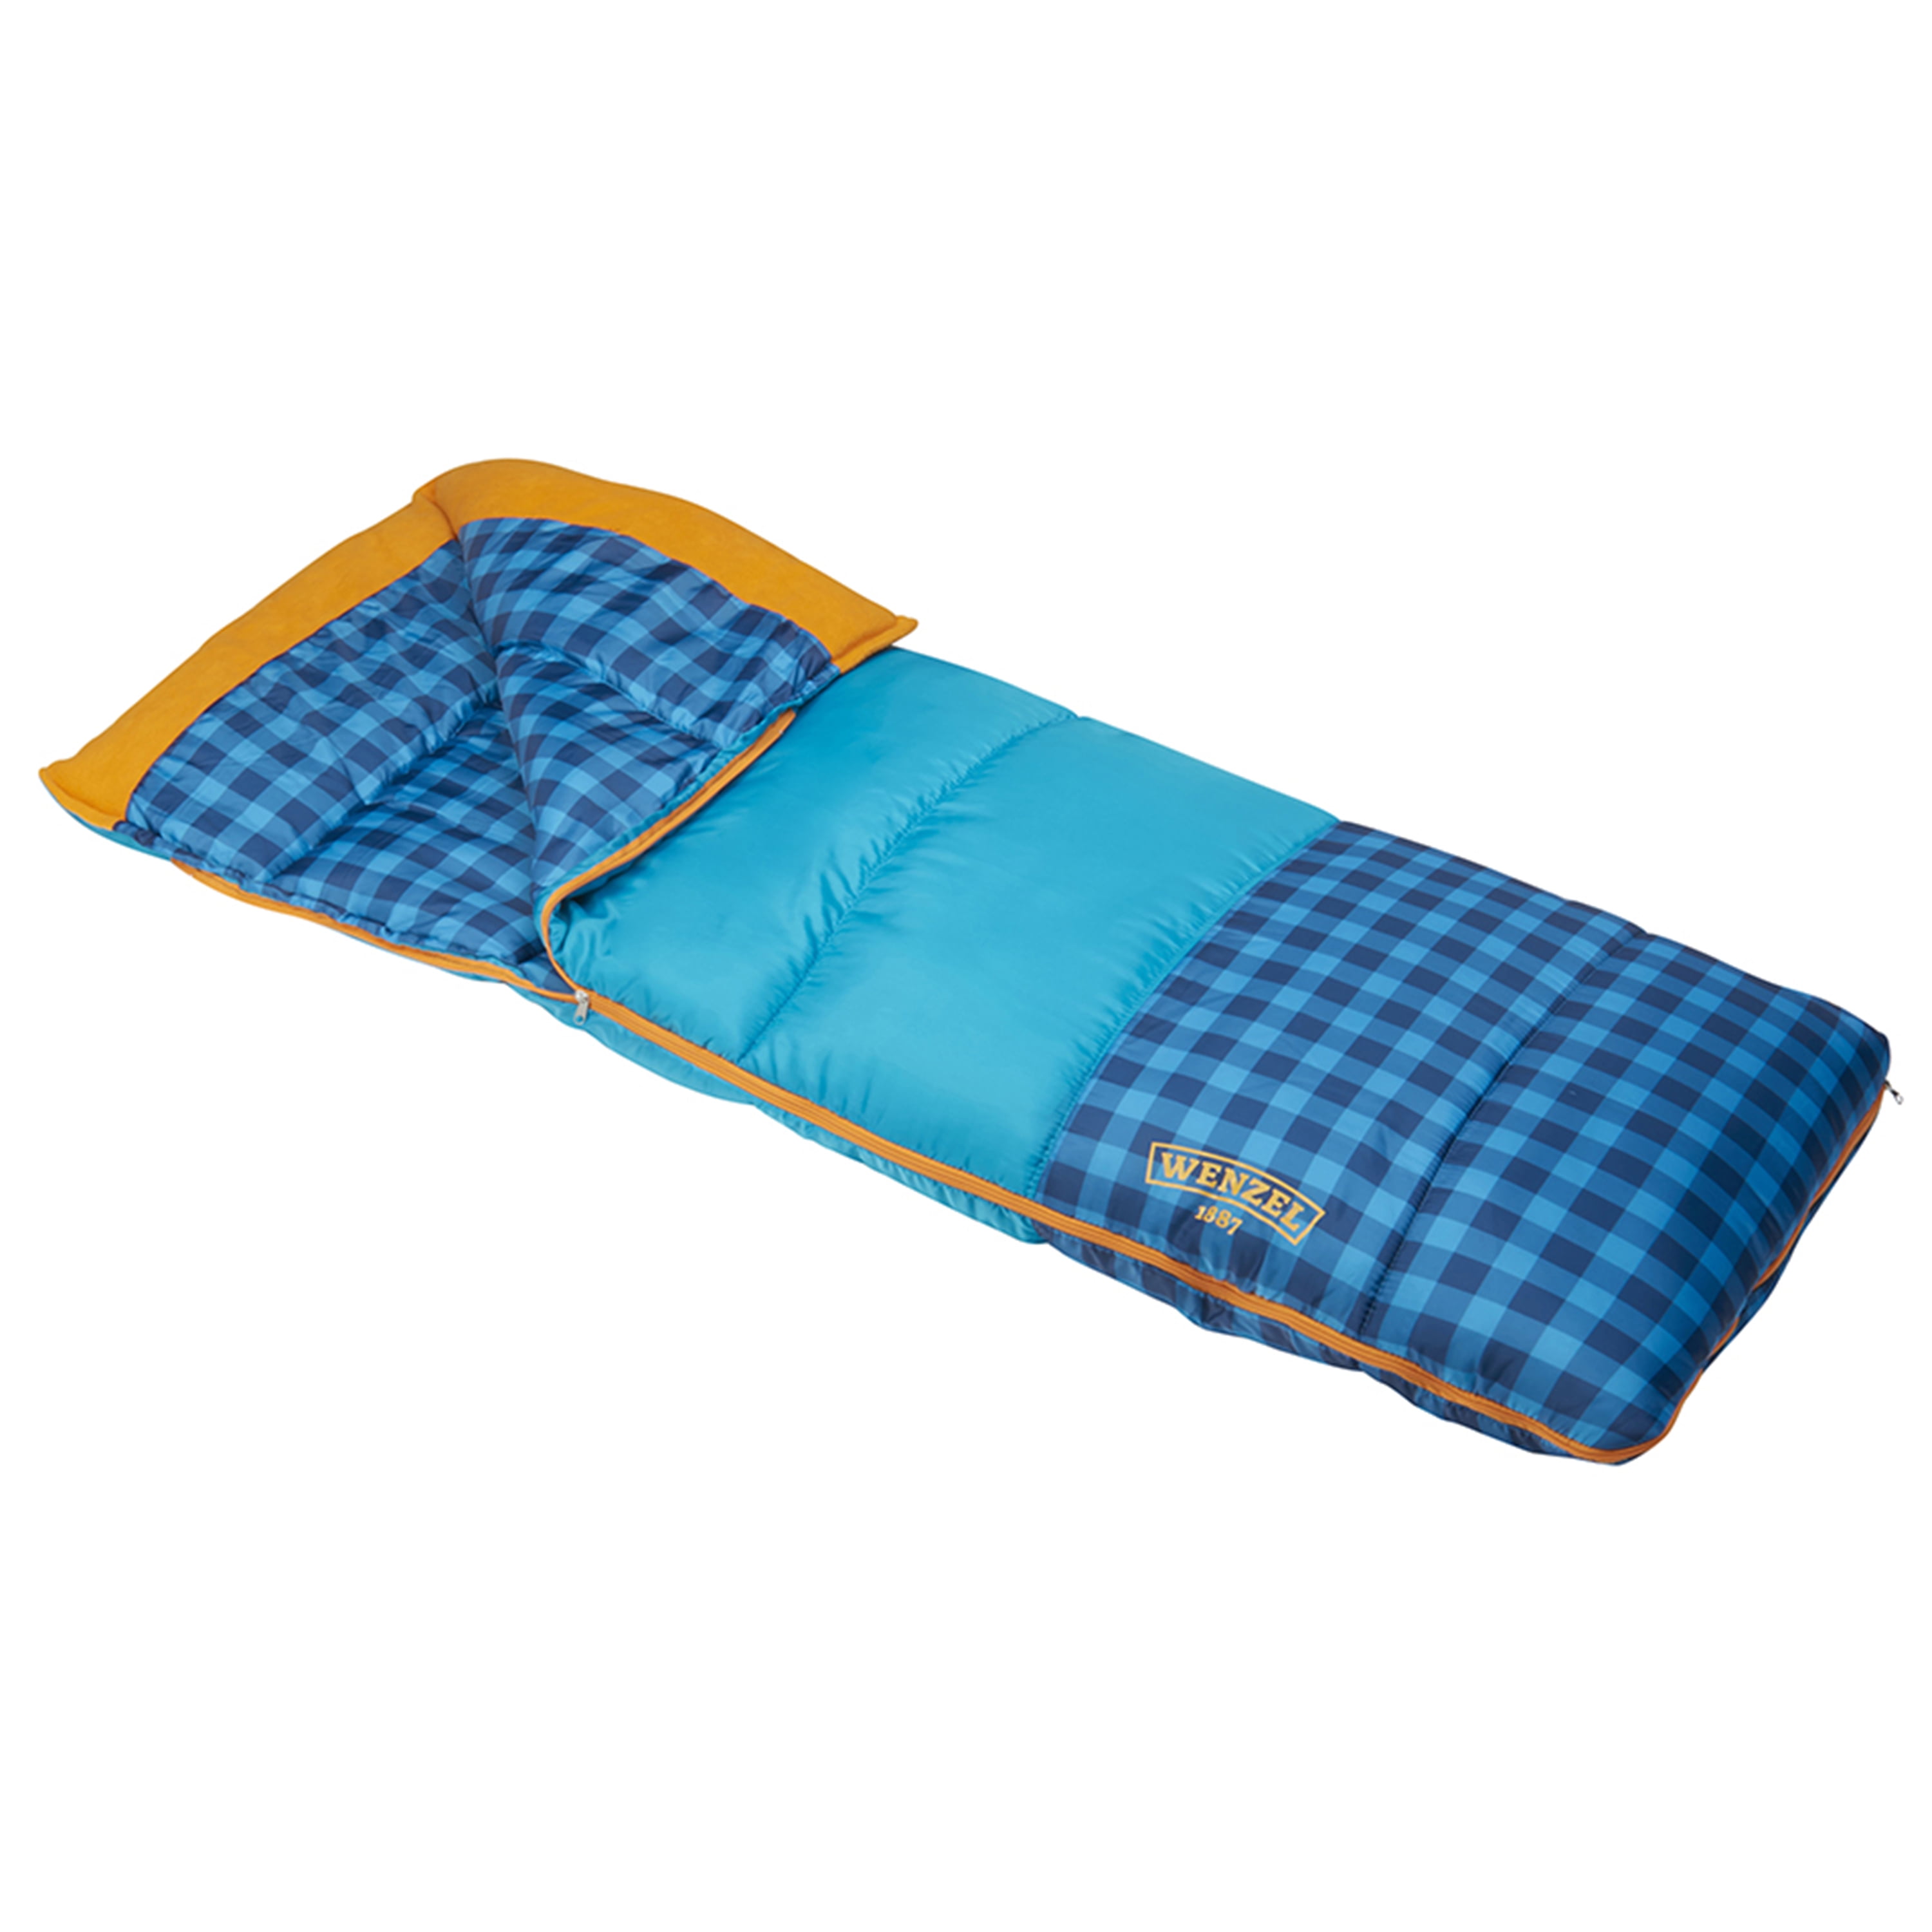 Wenzel   Sleeping Bag Blue 30 Degree Camping Adult Size 33" x 75" 